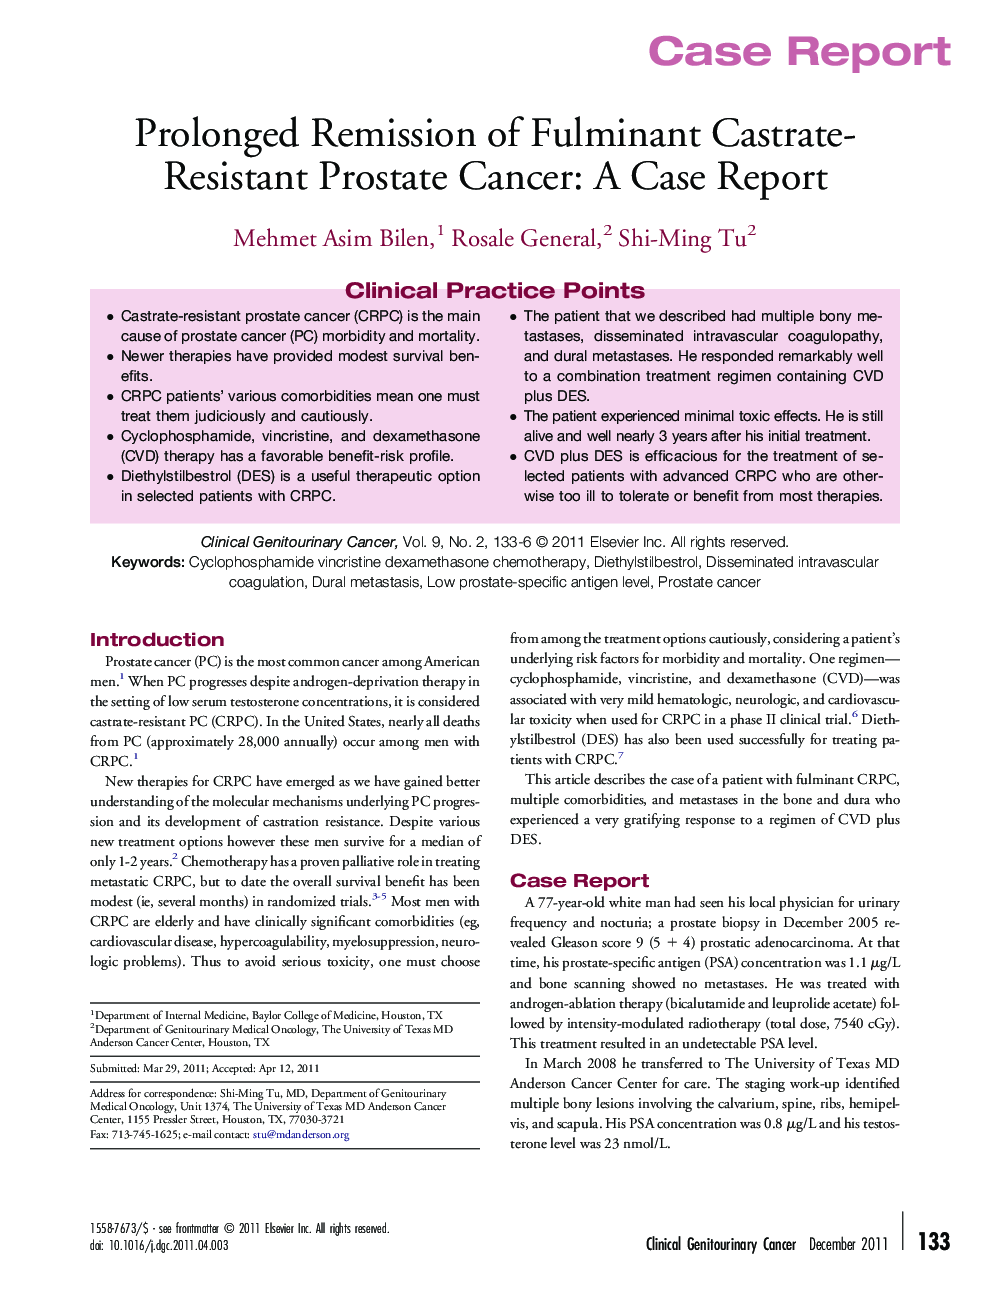 Prolonged Remission of Fulminant Castrate-Resistant Prostate Cancer: A Case Report